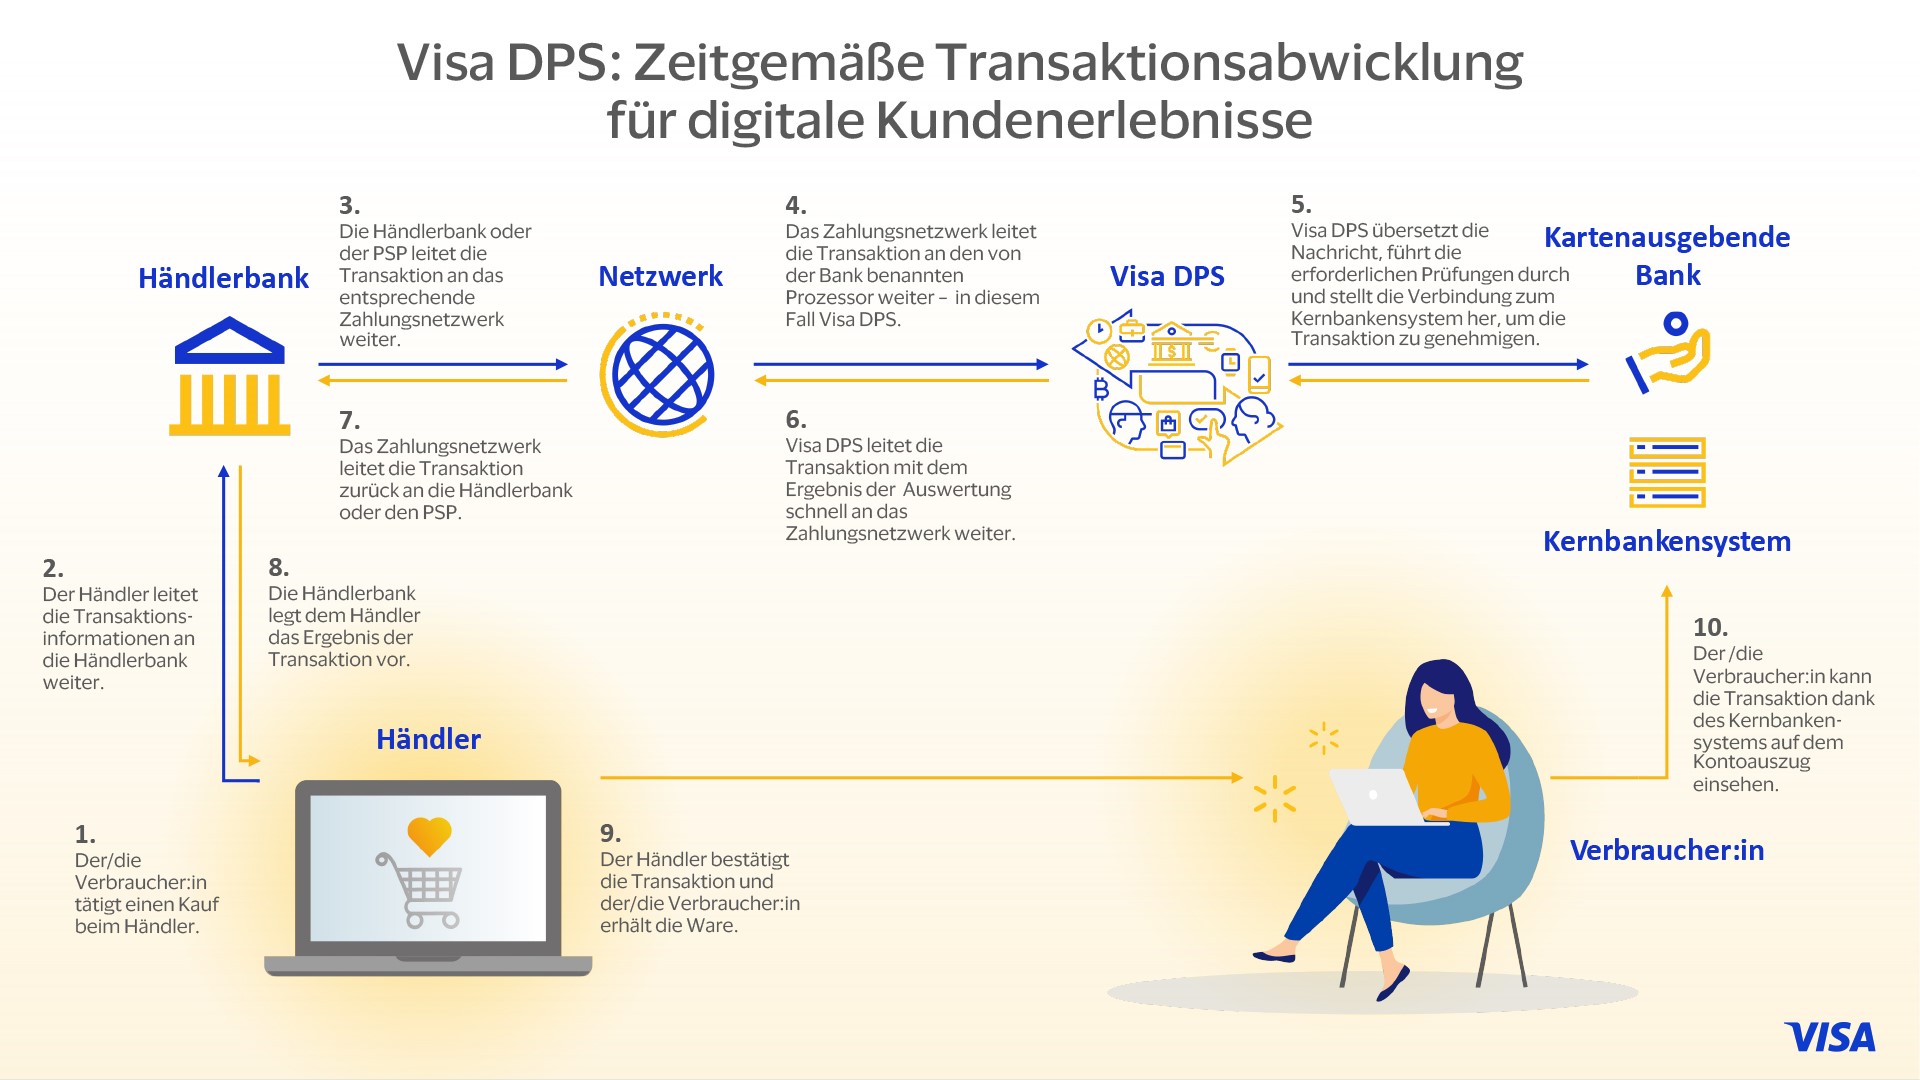 Infographic showing how Visa DPS works